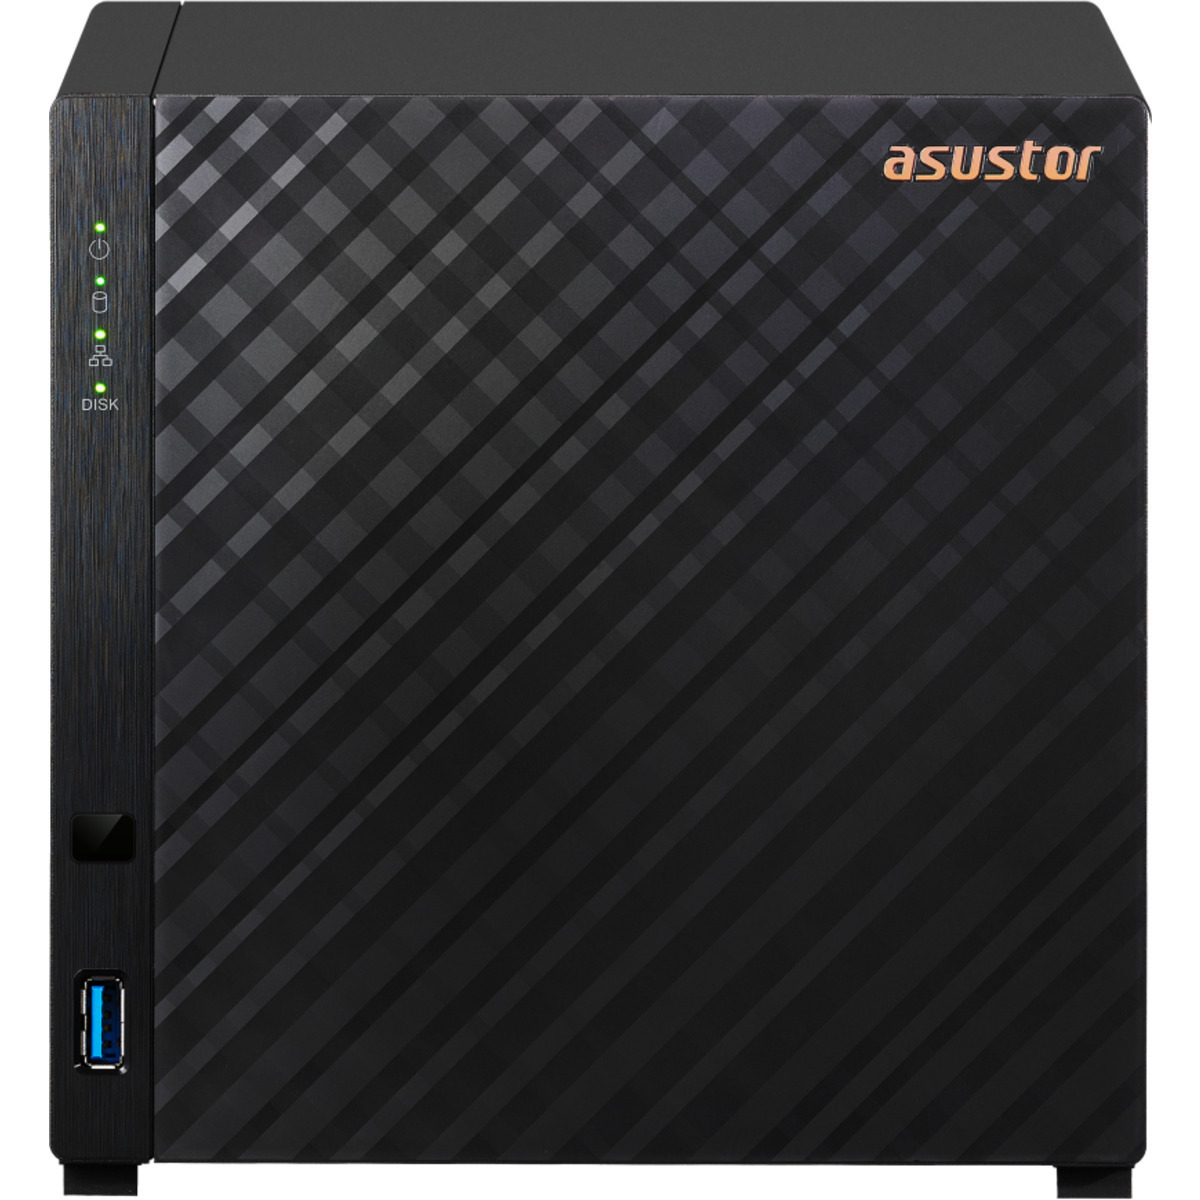 ASUSTOR DRIVESTOR 4 AS1104T 66tb 4-Bay Desktop Personal / Basic Home / Small Office NAS - Network Attached Storage Device 3x22tb Western Digital Red Pro WD221KFGX 3.5 7200rpm SATA 6Gb/s HDD NAS Class Drives Installed - Burn-In Tested DRIVESTOR 4 AS1104T